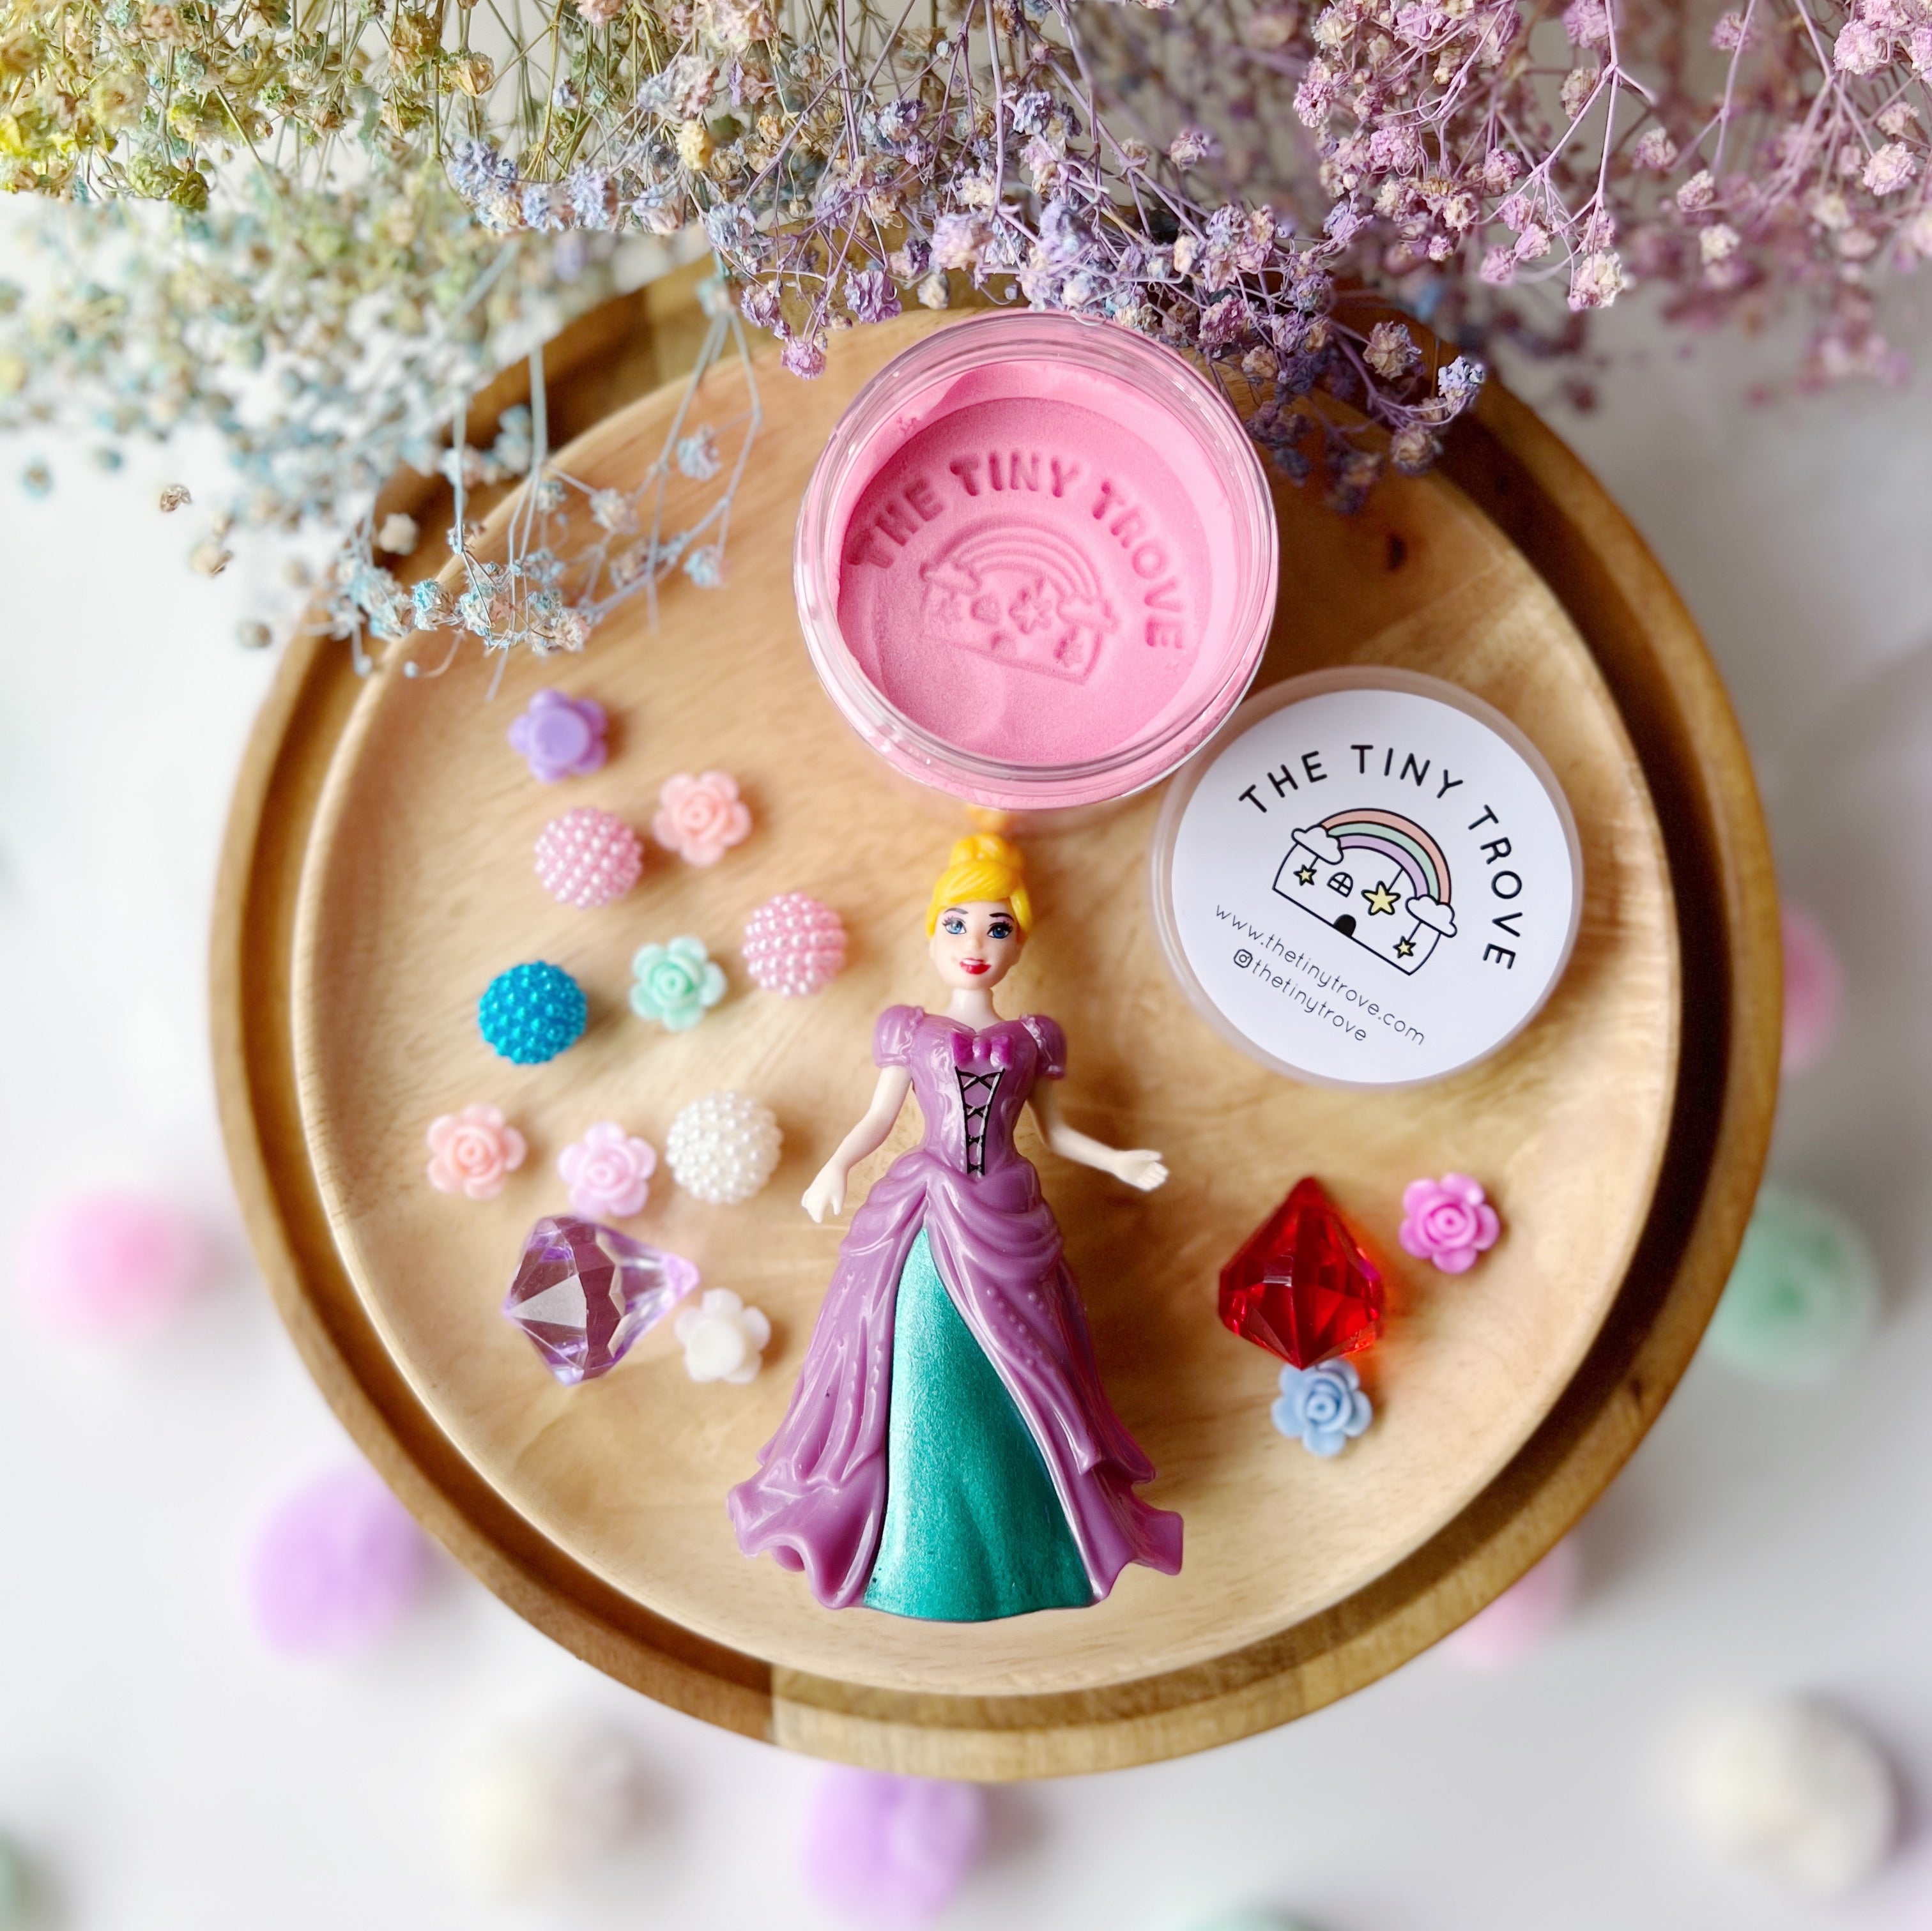 Princess Playtime Magic Play Sand Party Pack